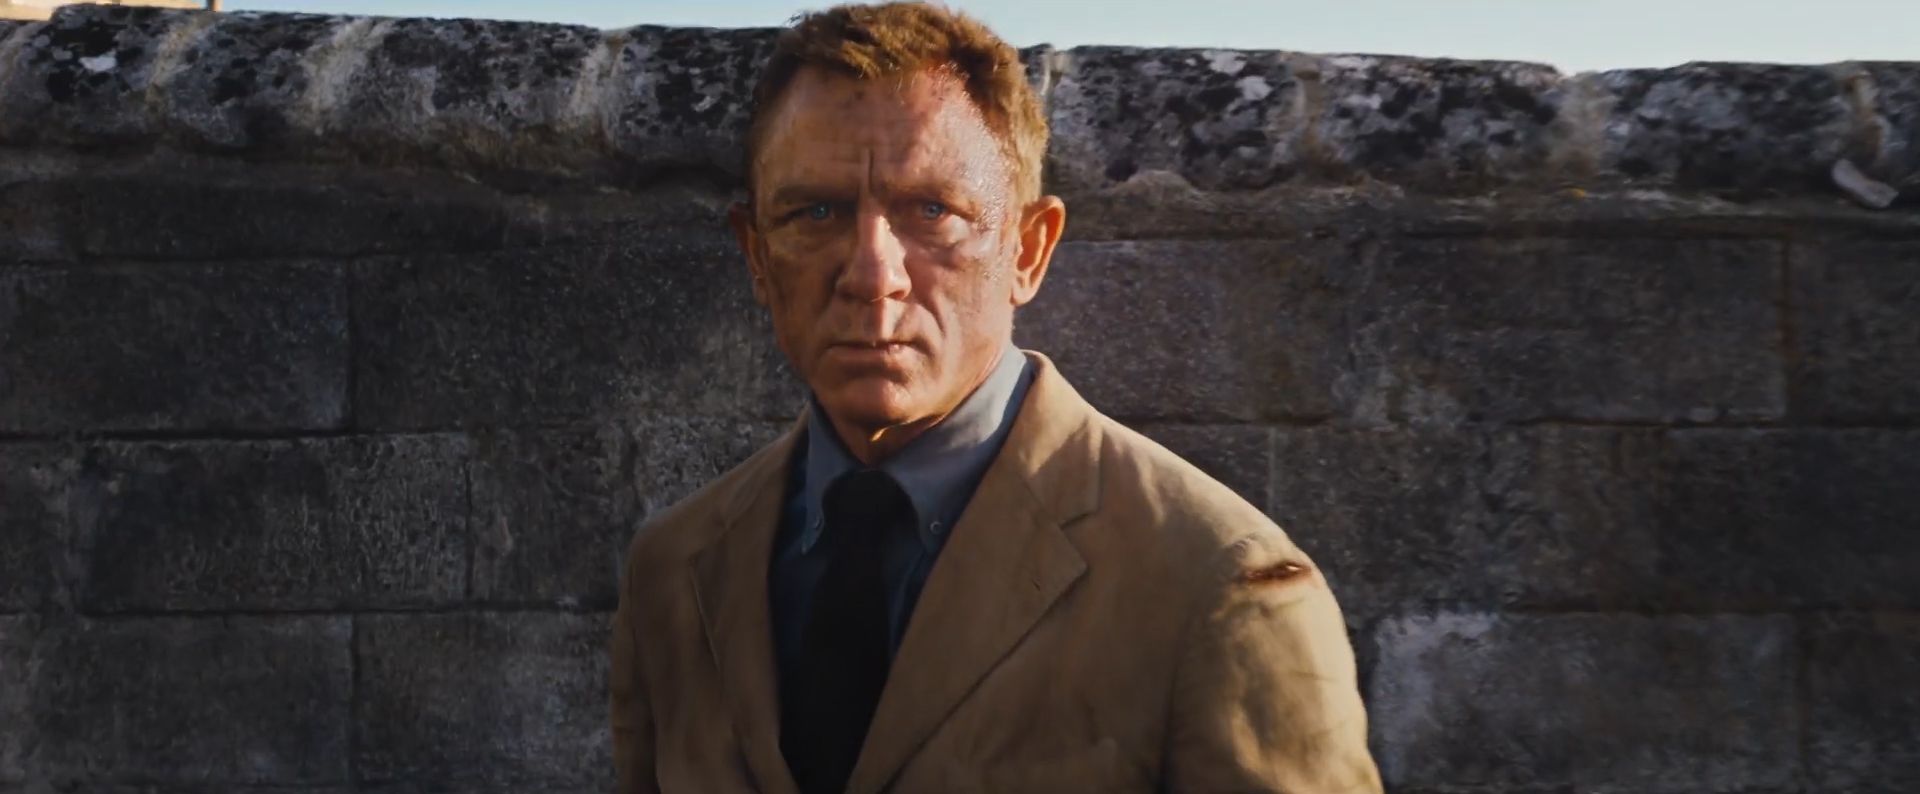 No Time To Die: Release Date And What Could James Bond Have In Store?